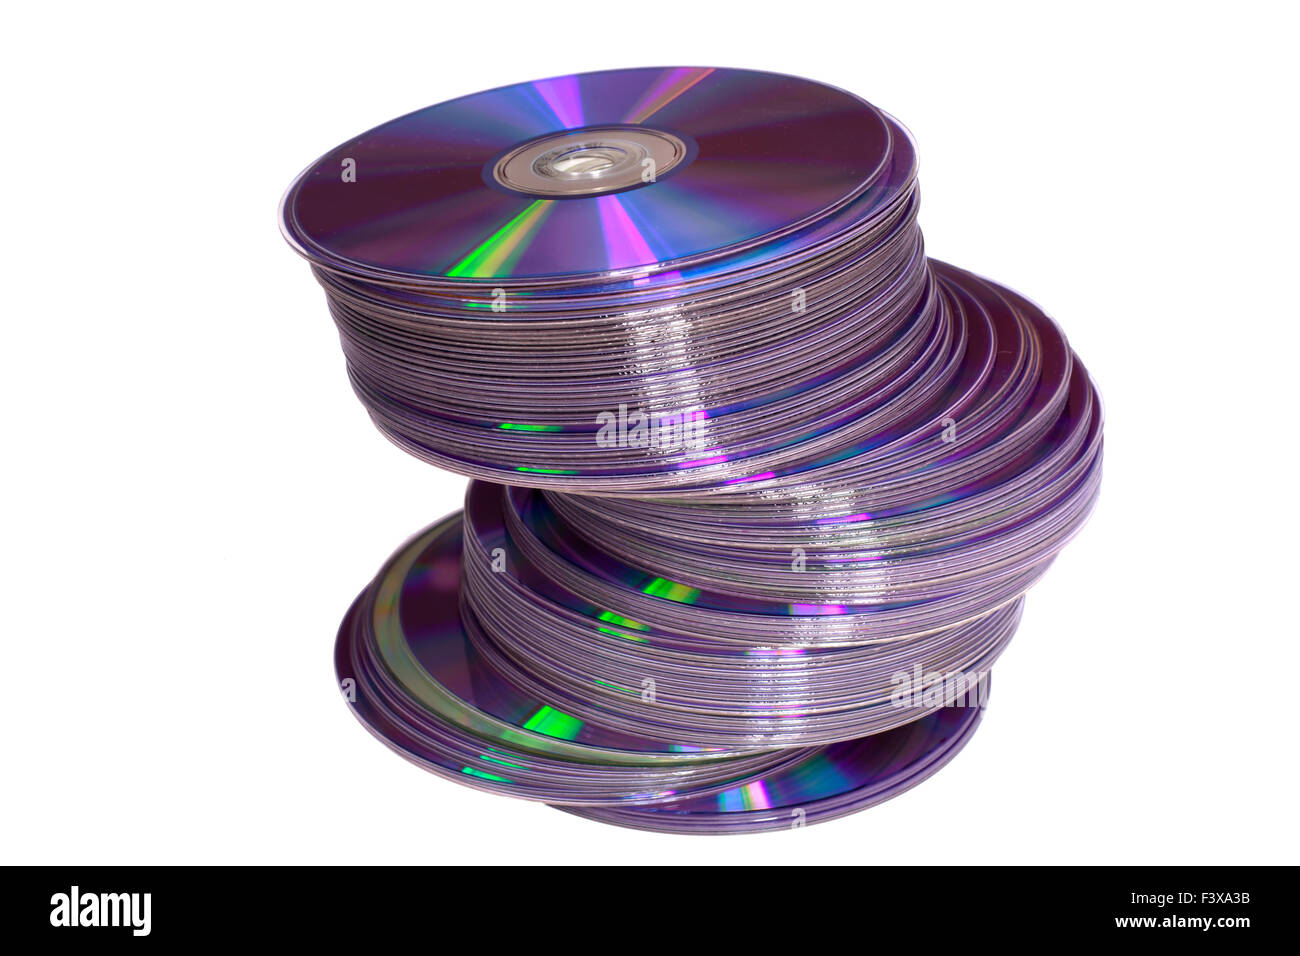 A pile of dvd discs isolated on white Stock Photo